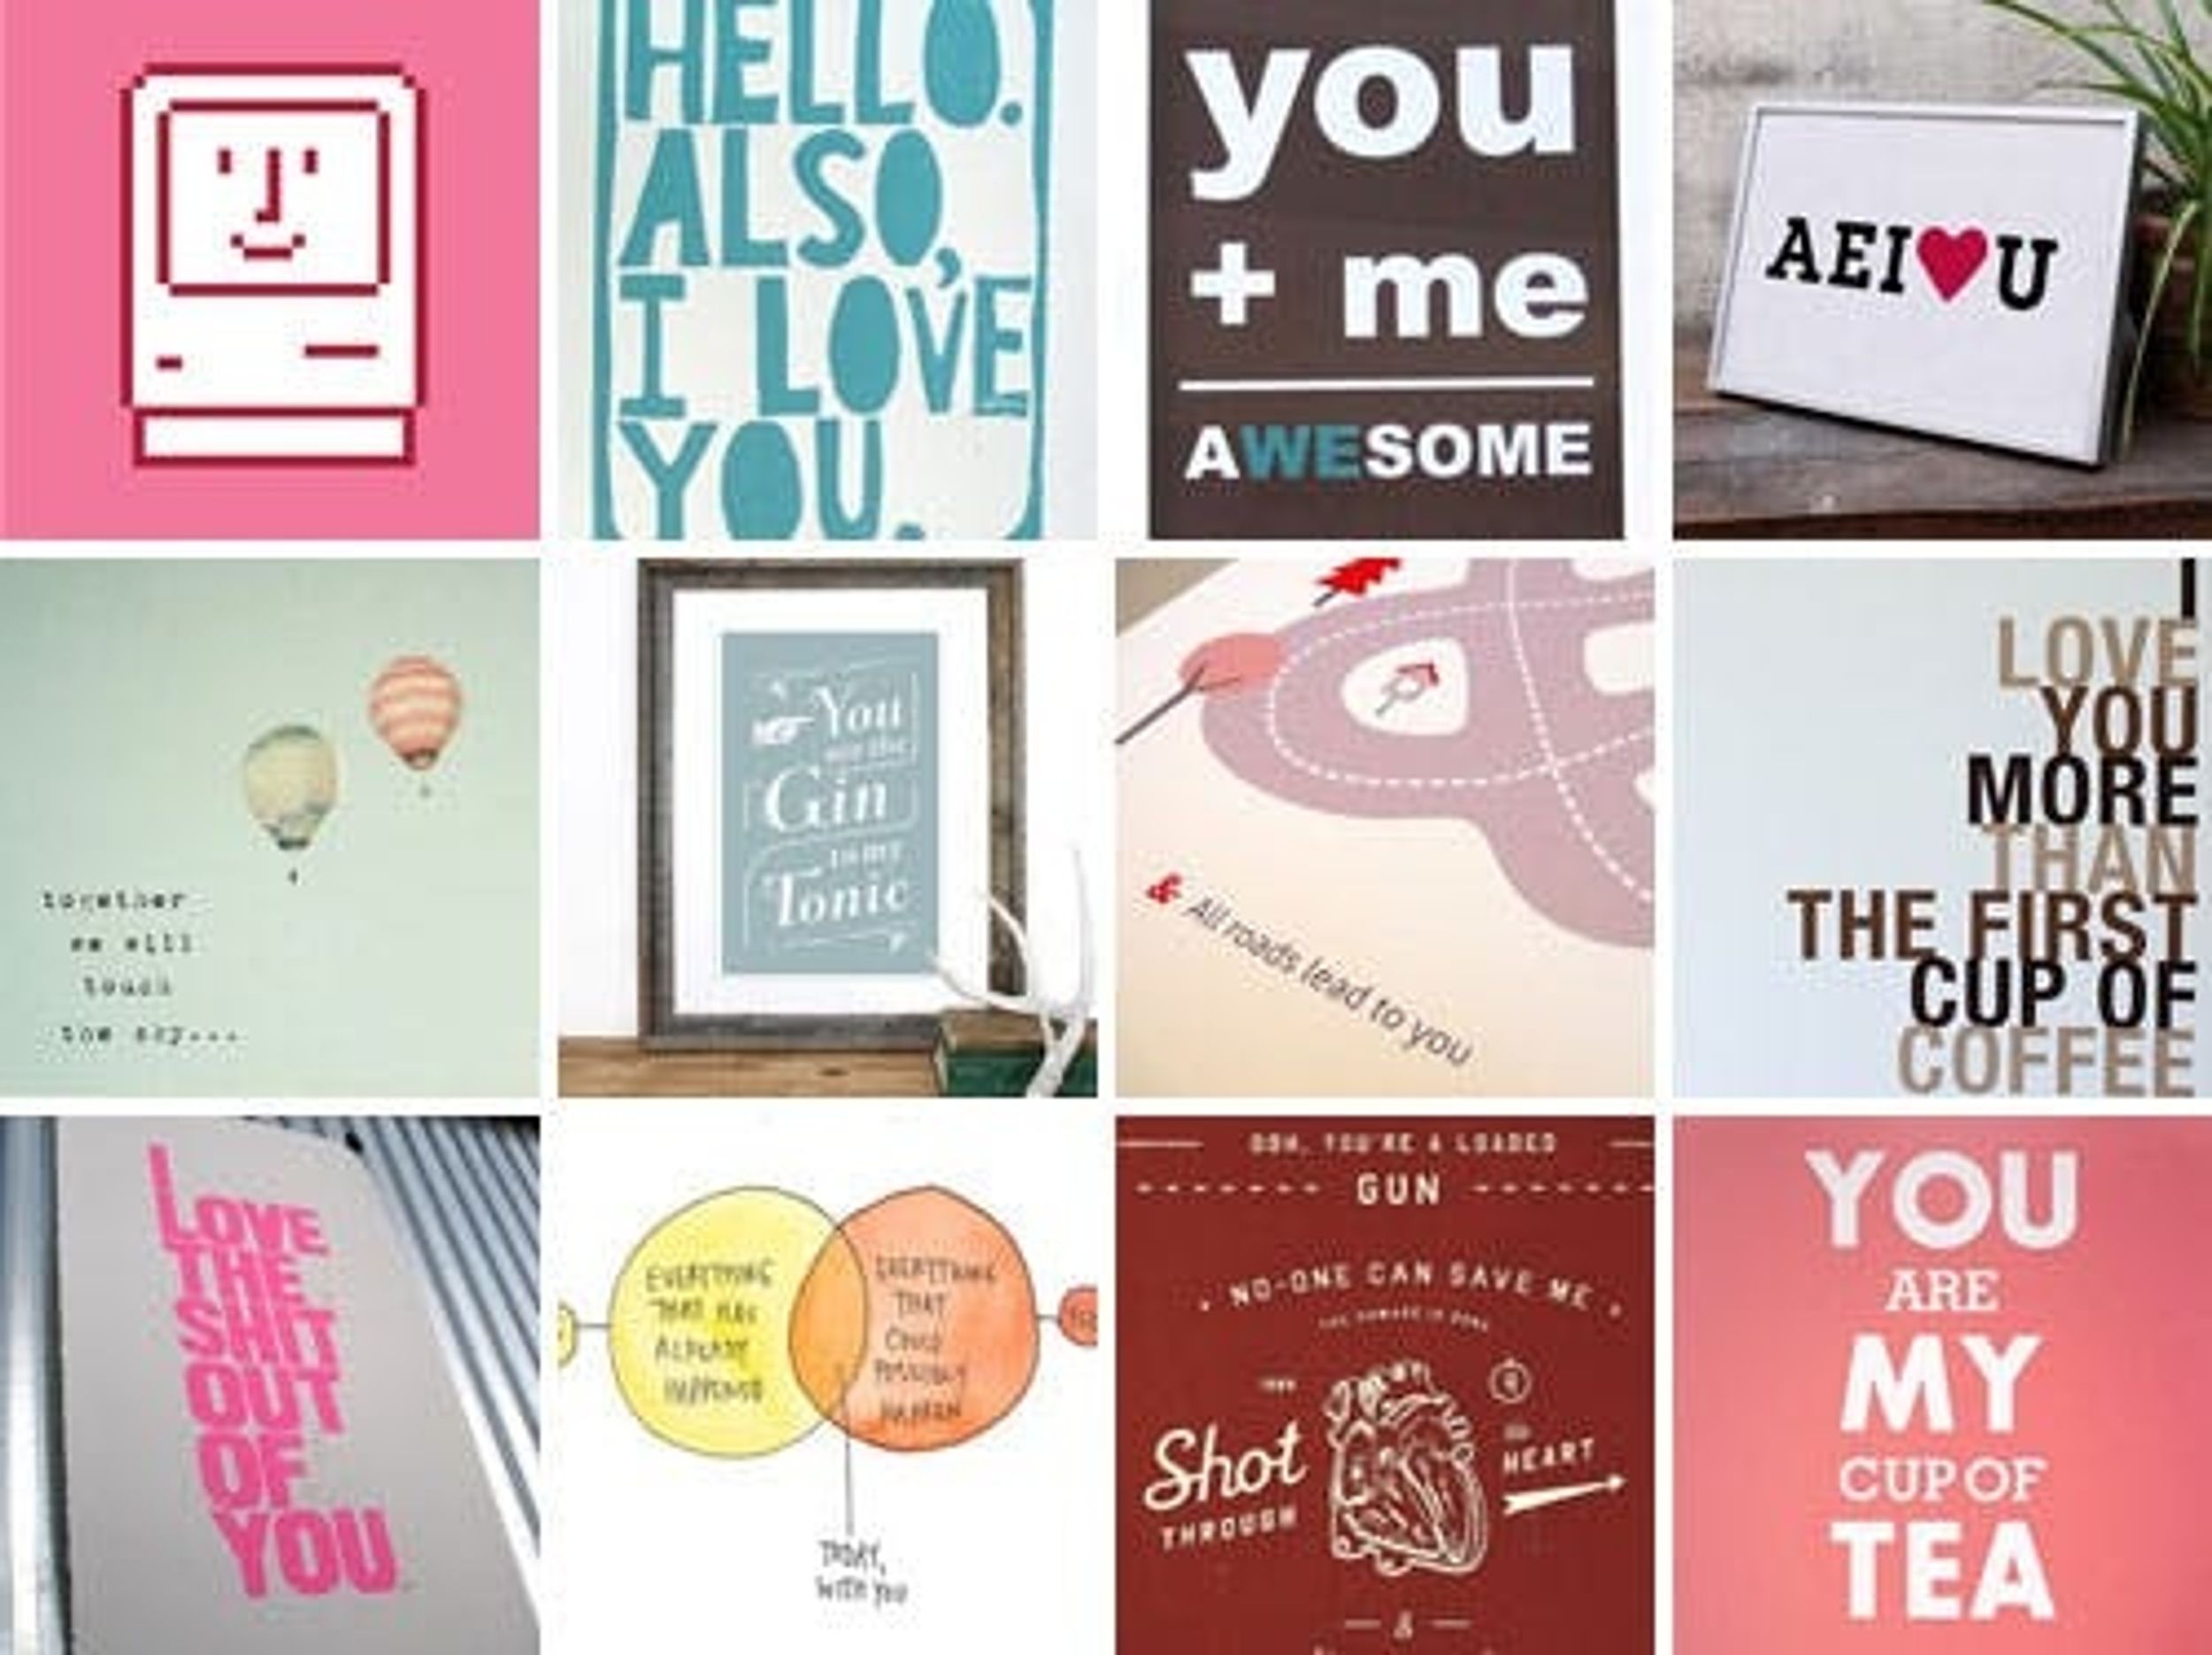 12 Love-ly Typographical Prints For Your Valentine